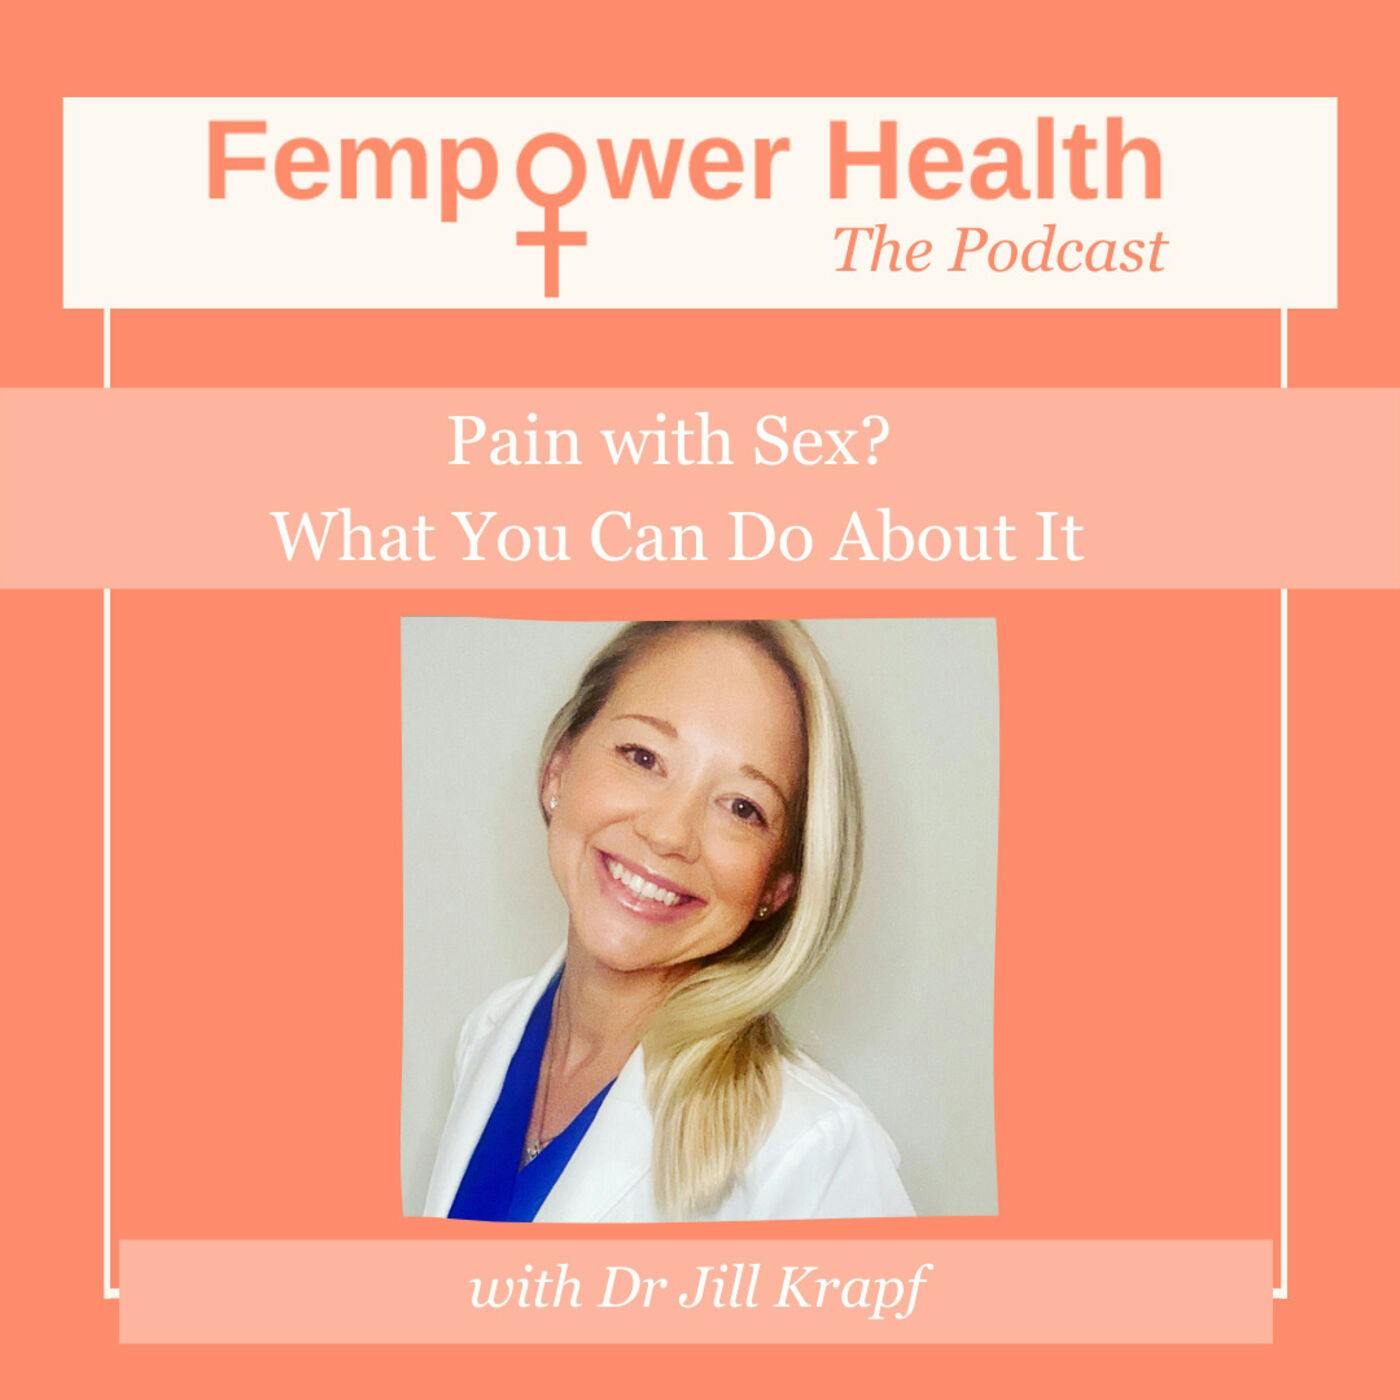 LISTEN AGAIN:  Pain with Sex?  What You Can Do About It | Dr. Jill Krapf